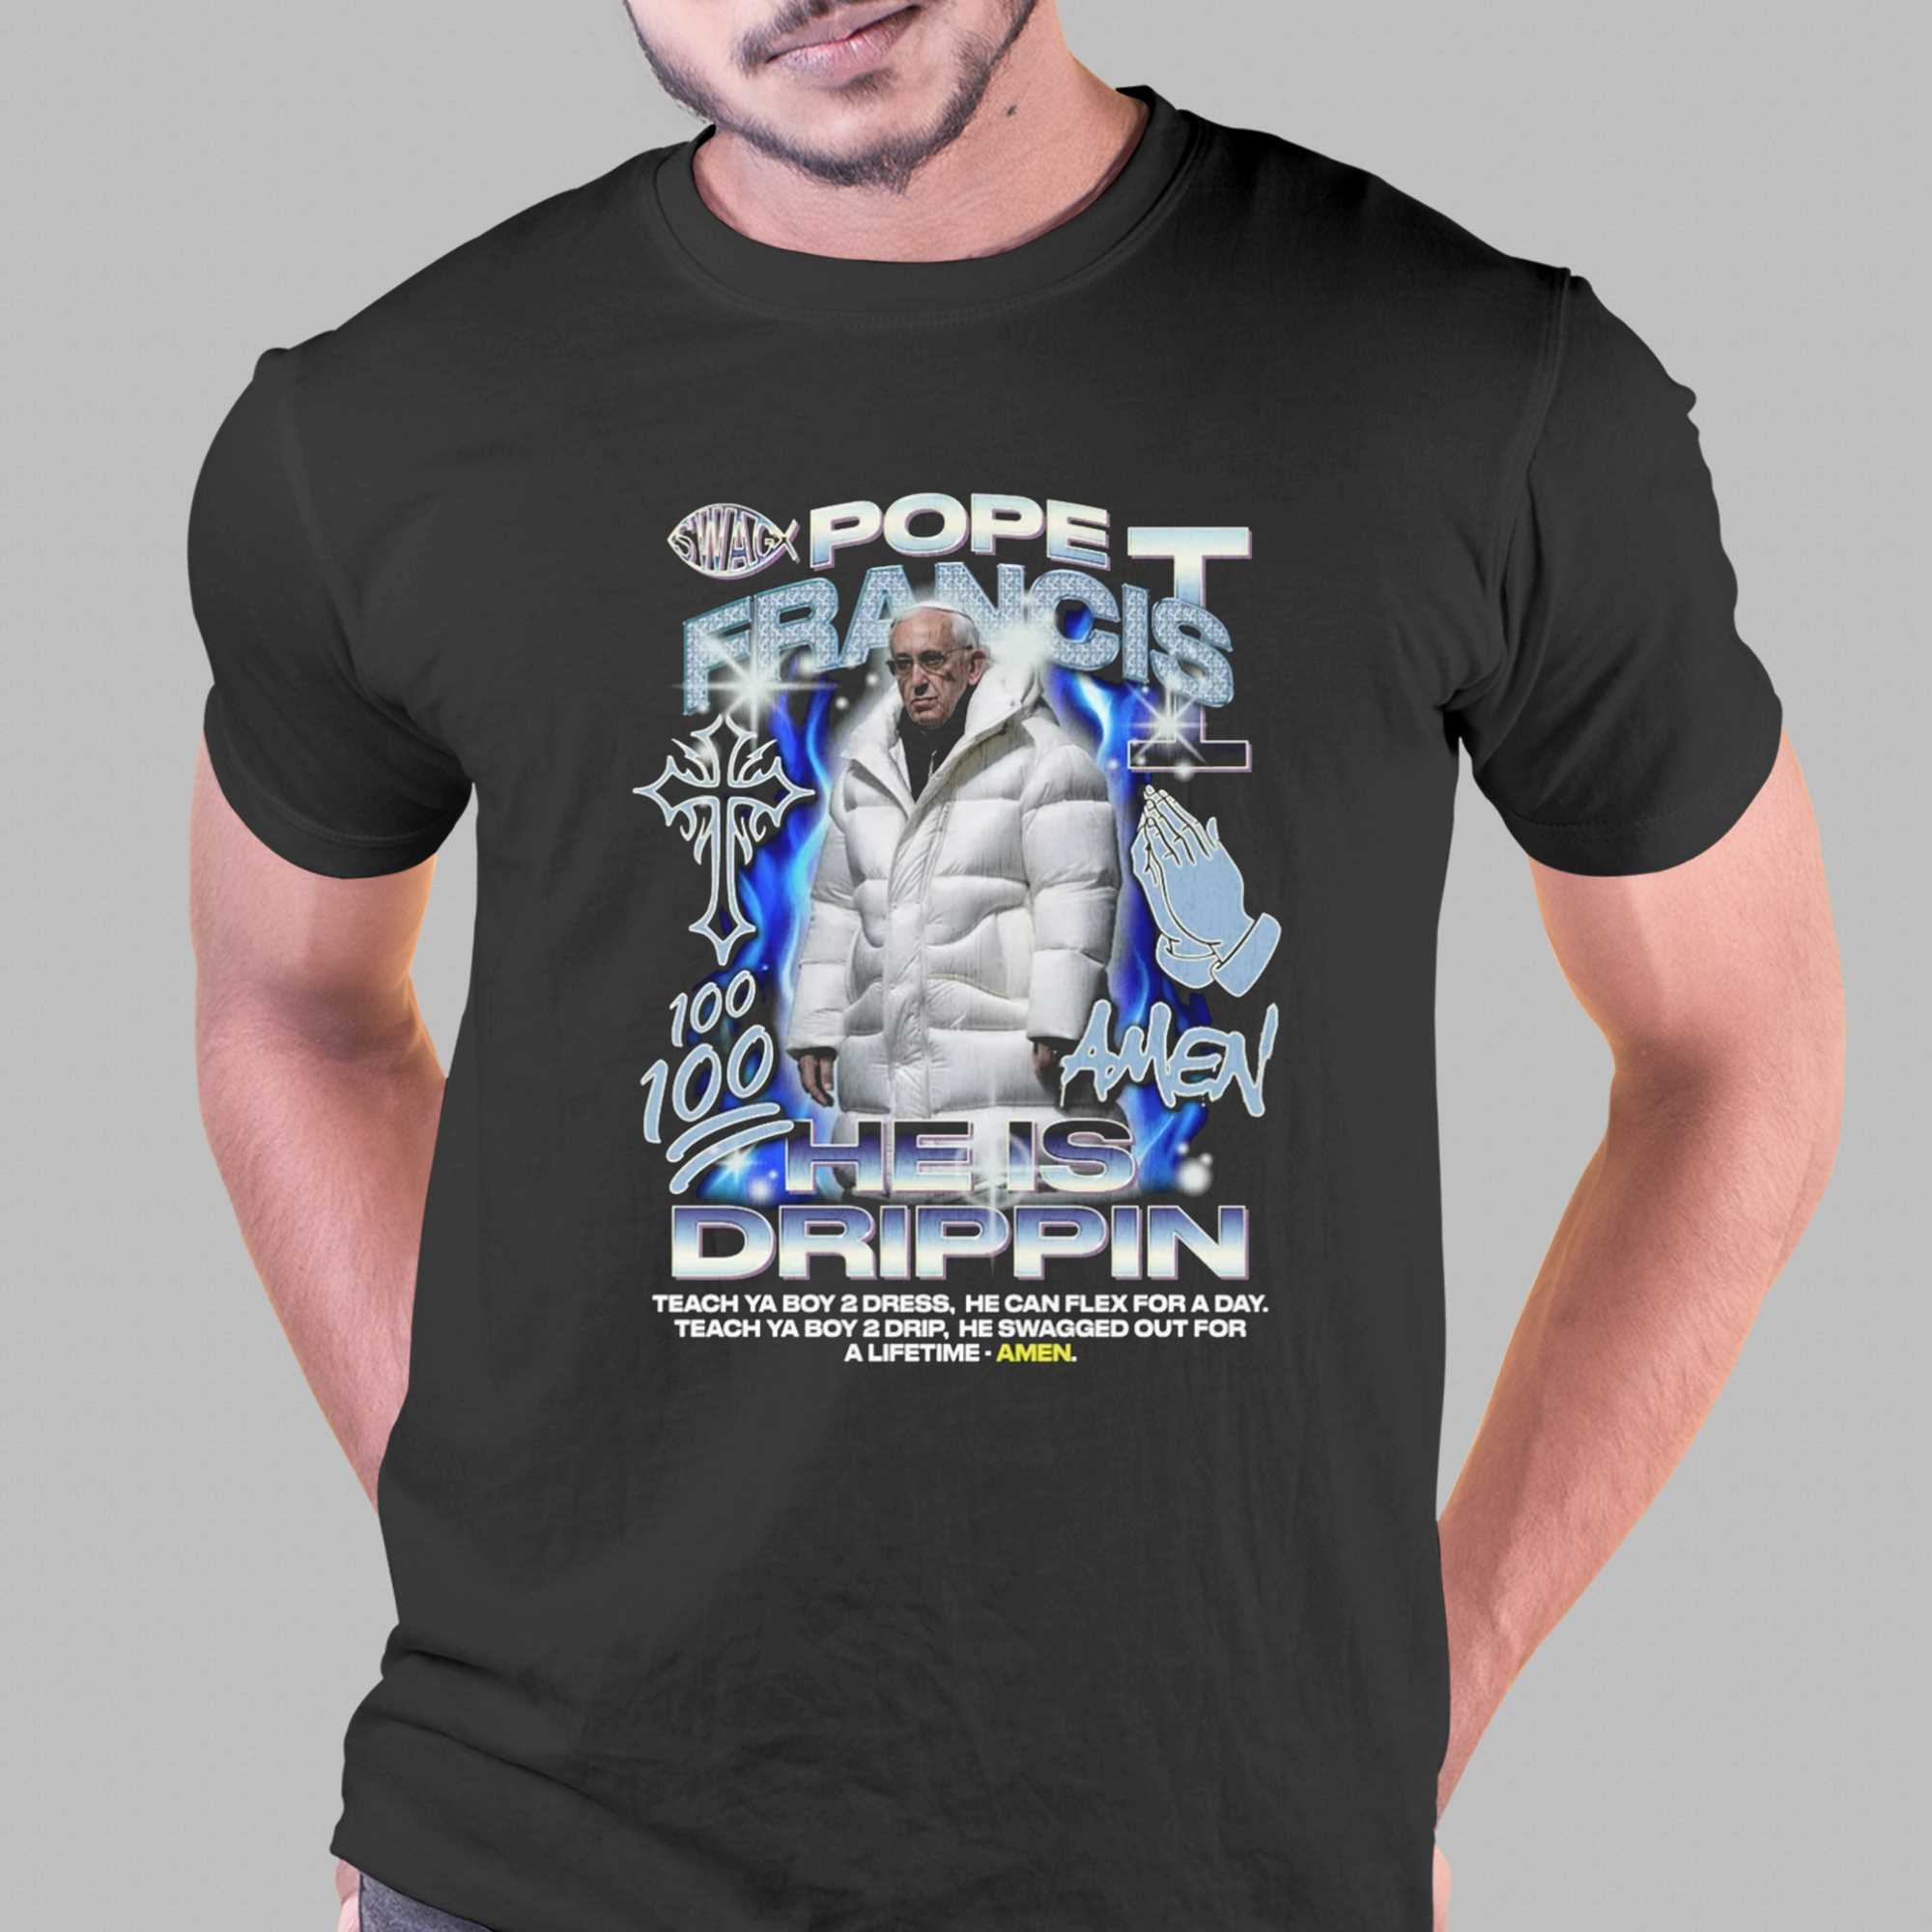 Pope Francis Is Drippin T-shirt - Shibtee Clothing